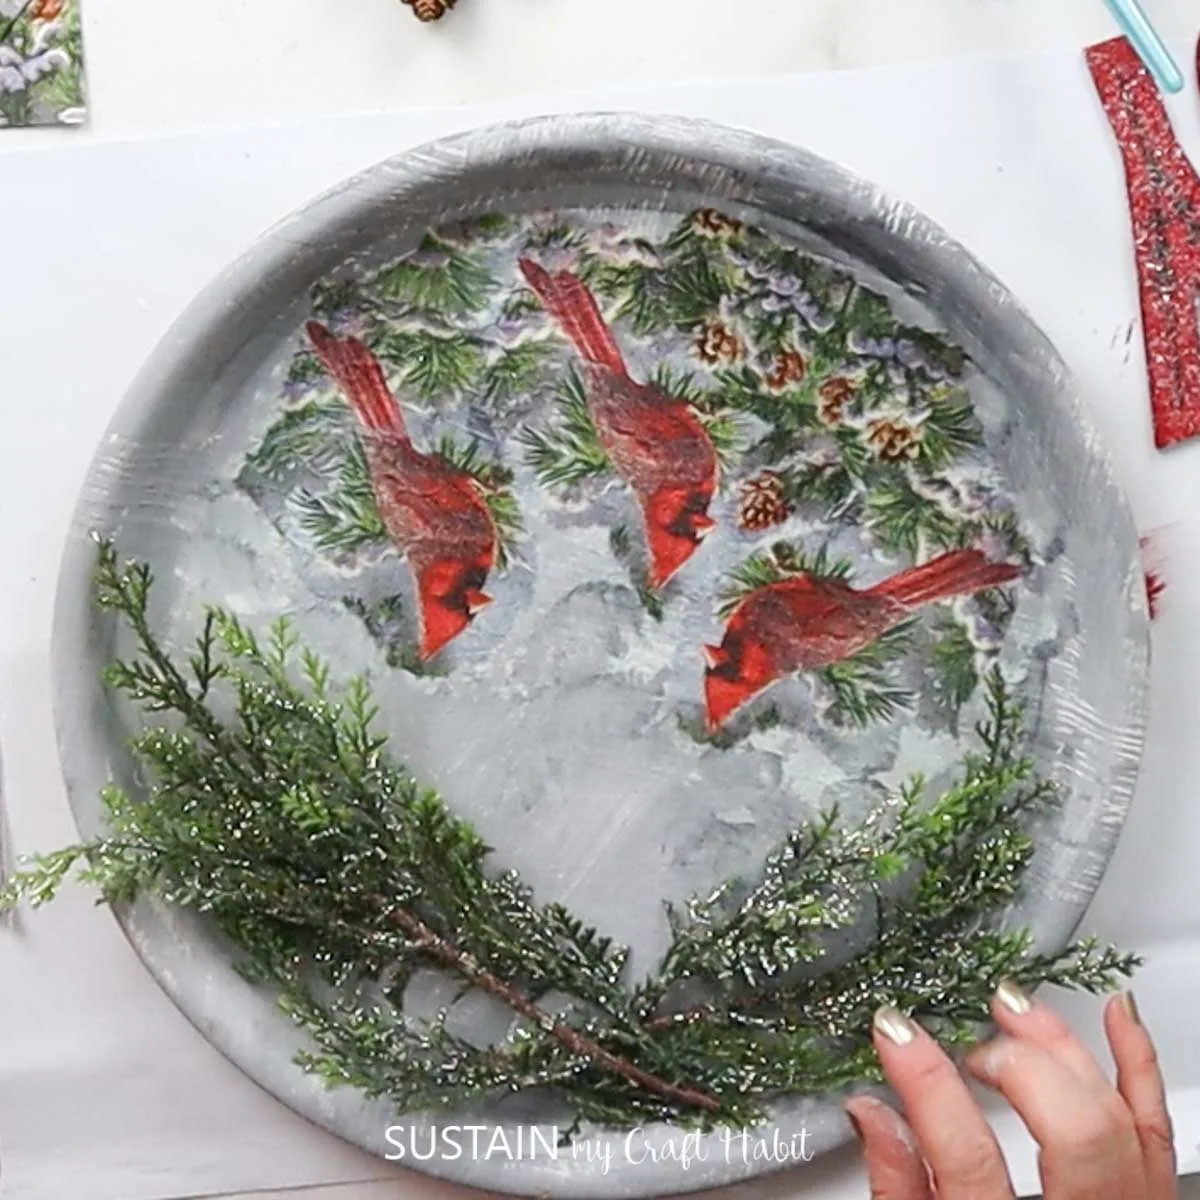 Attaching evergreen branches onto a tray.